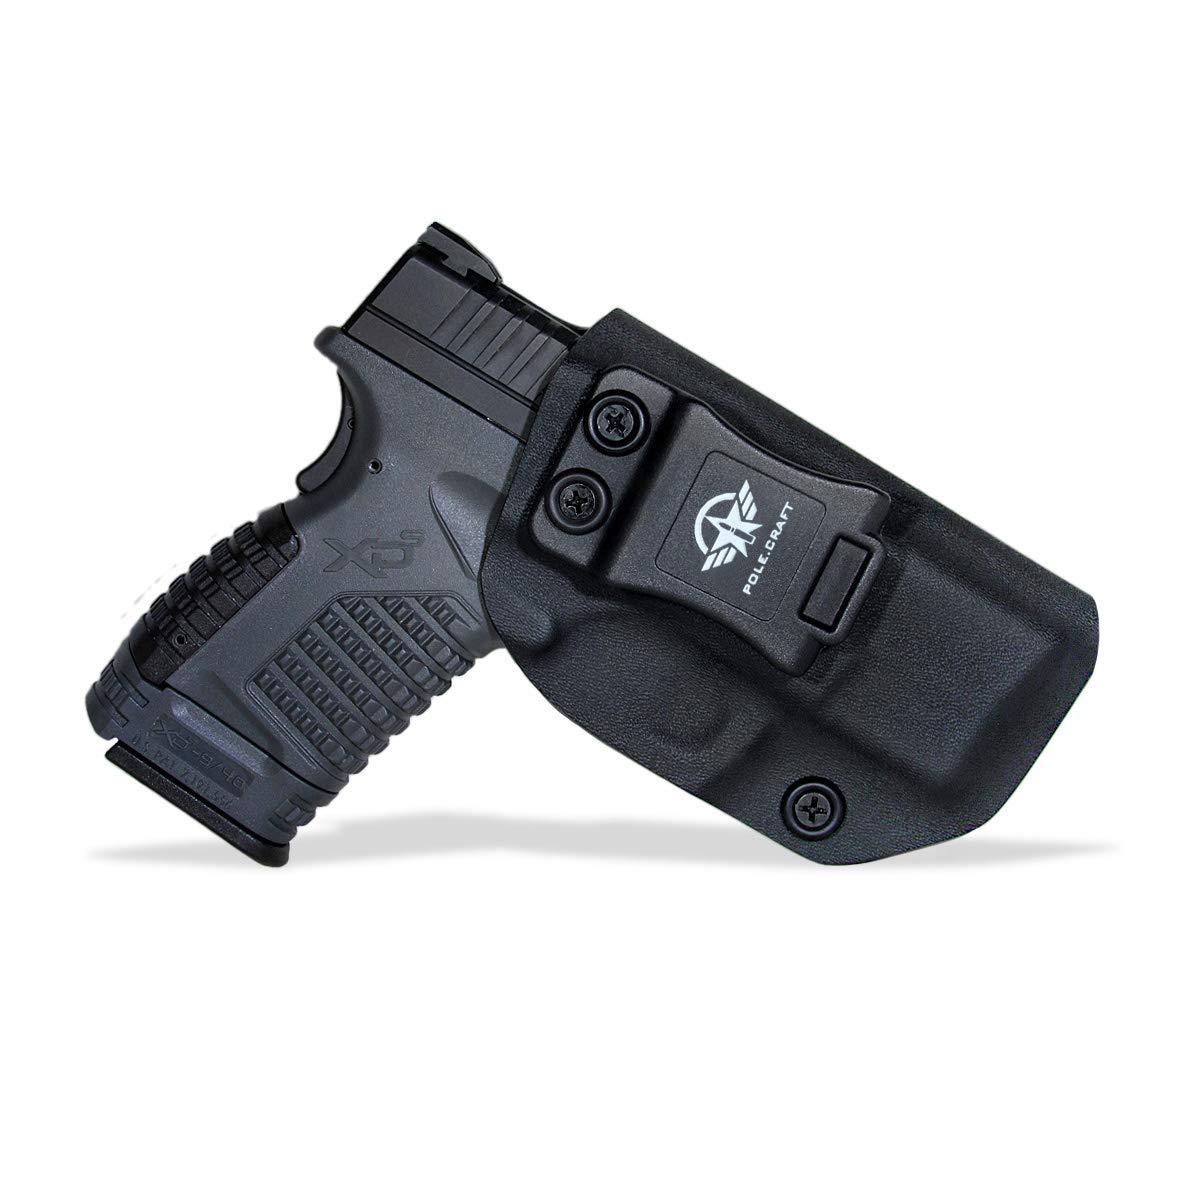 IWB Holster Holder for Concealed Carry Bags